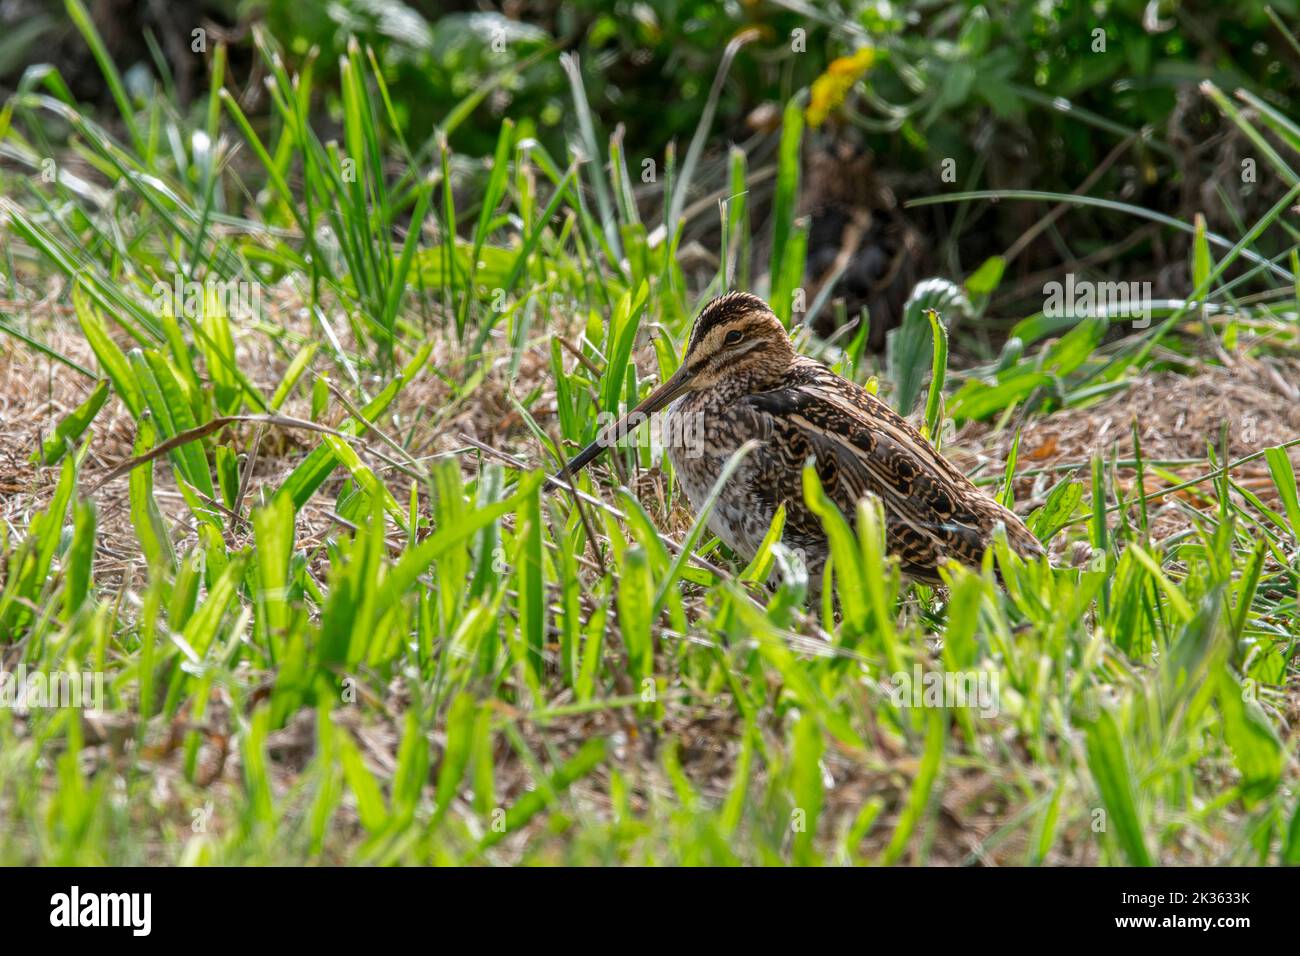 Common snipe (Gallinago gallinago) hidden in grassland / meadow, showing camouflage colours in autumn / fall Stock Photo